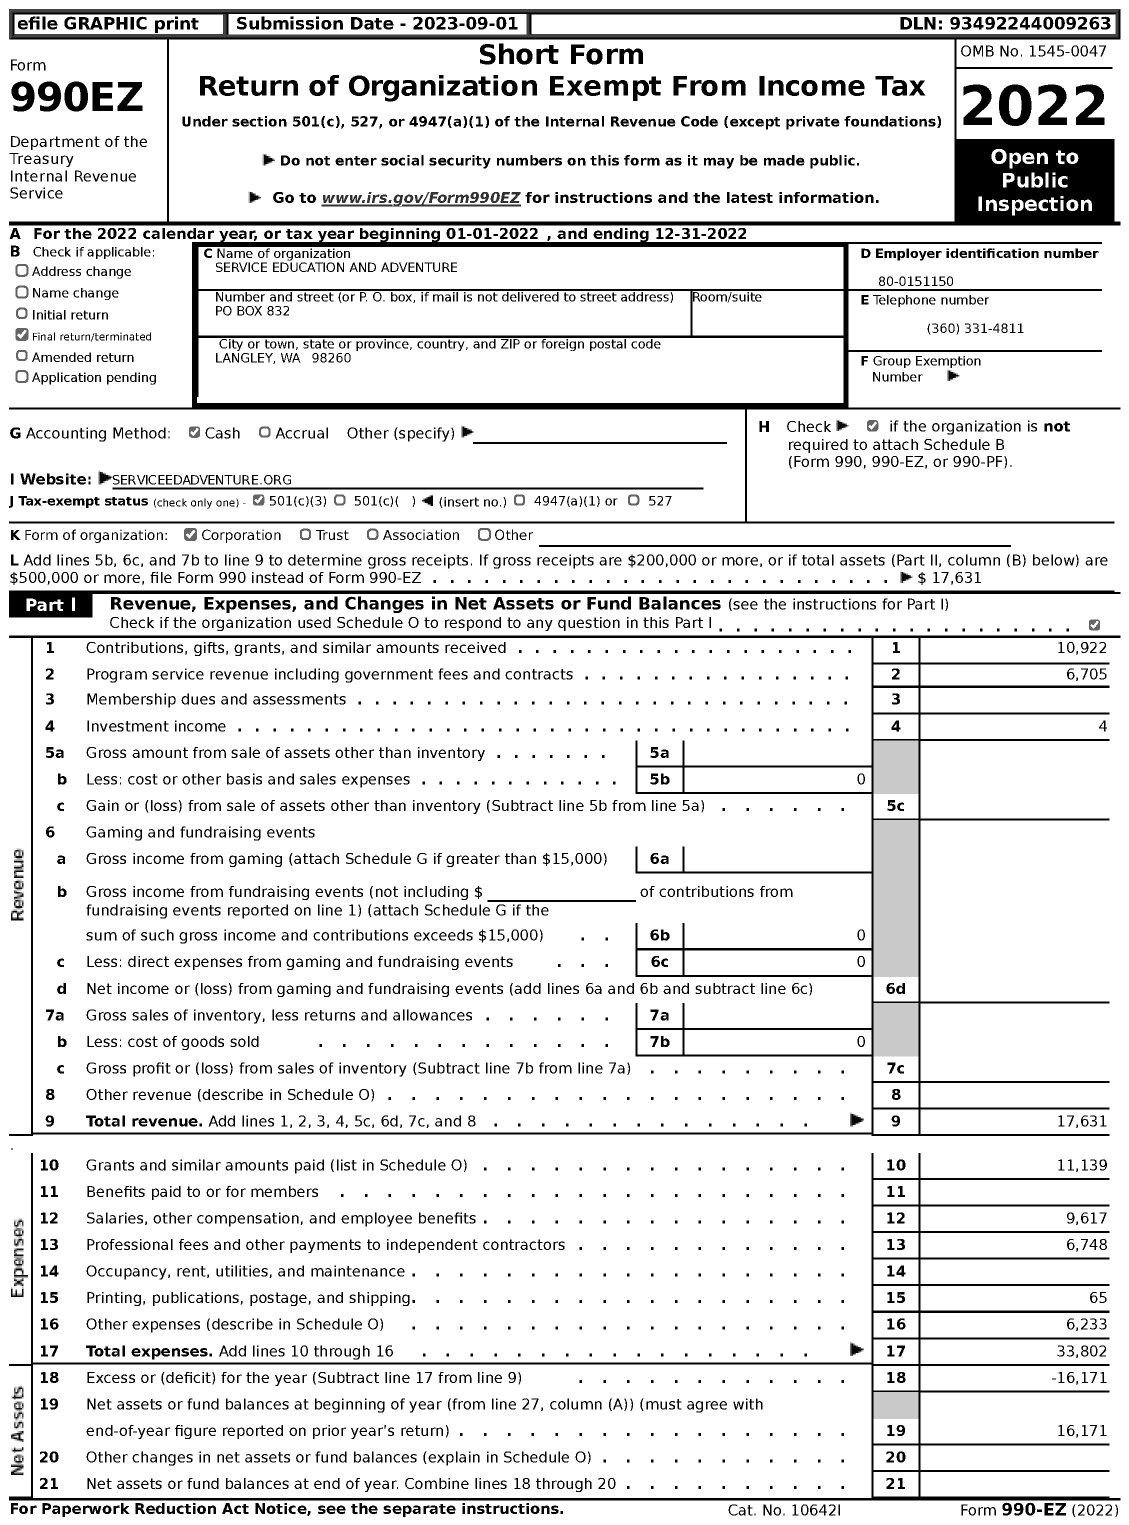 Image of first page of 2022 Form 990EZ for Service Education and Adventure (SEA)